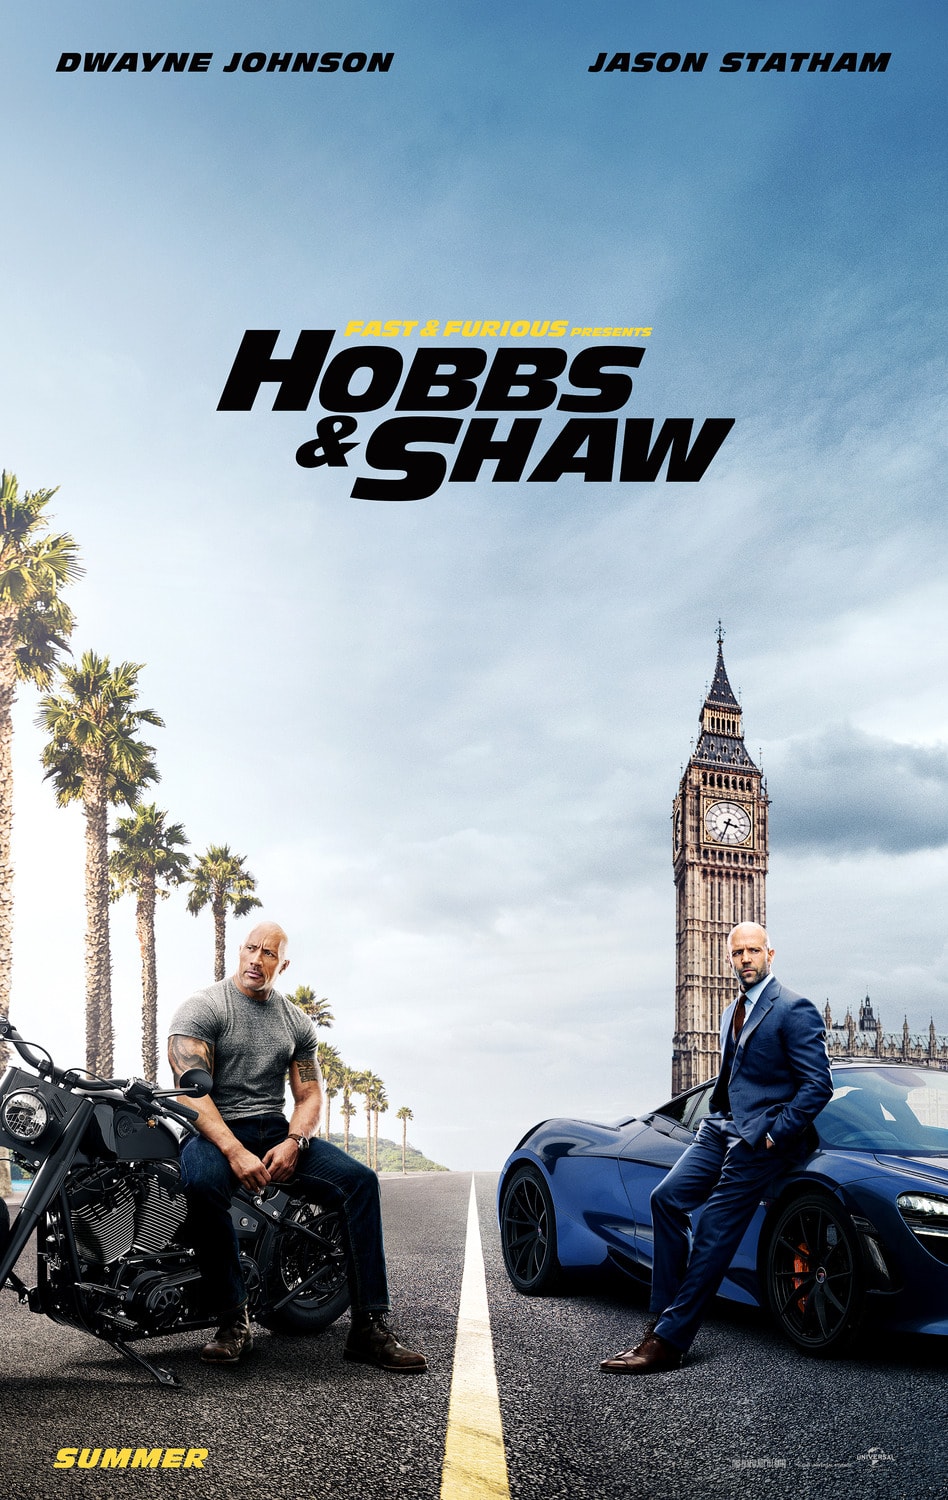 Download Fast & Furious Presents: Hobbs & Shaw (2019) Blu-Ray Movie In 480p [400 MB] | 720p [1.4 GB] | 1080p [3.3 GB]